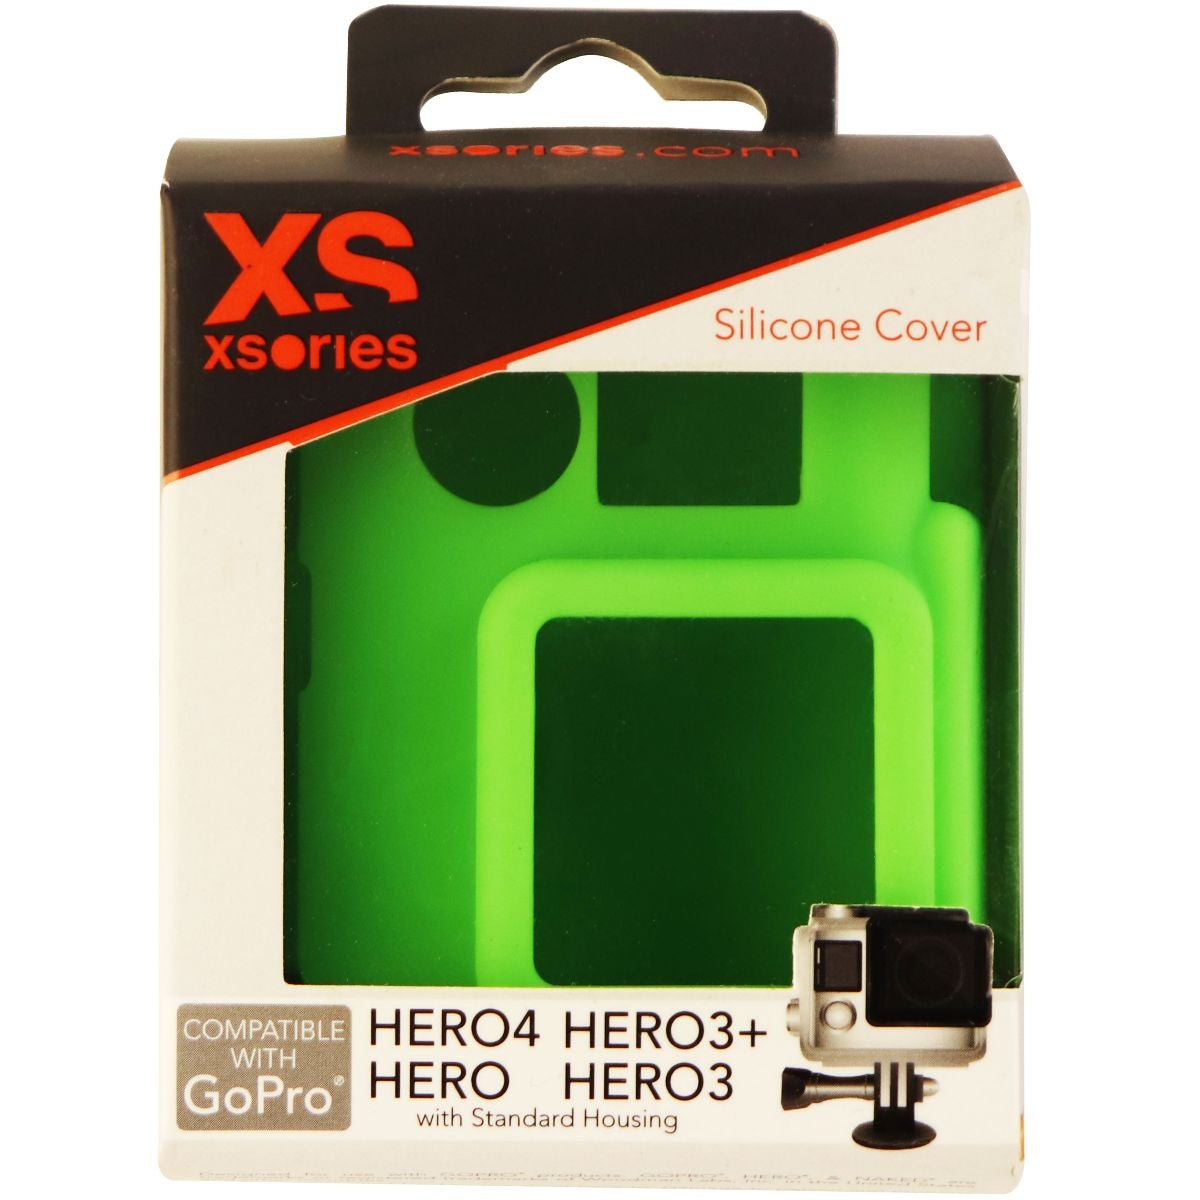 XSories Silicone Cover Case for GoPro Hero, Hero 3, 3+ and Hero 4 - Green Digital Camera - Cases, Bags & Covers XSories    - Simple Cell Bulk Wholesale Pricing - USA Seller